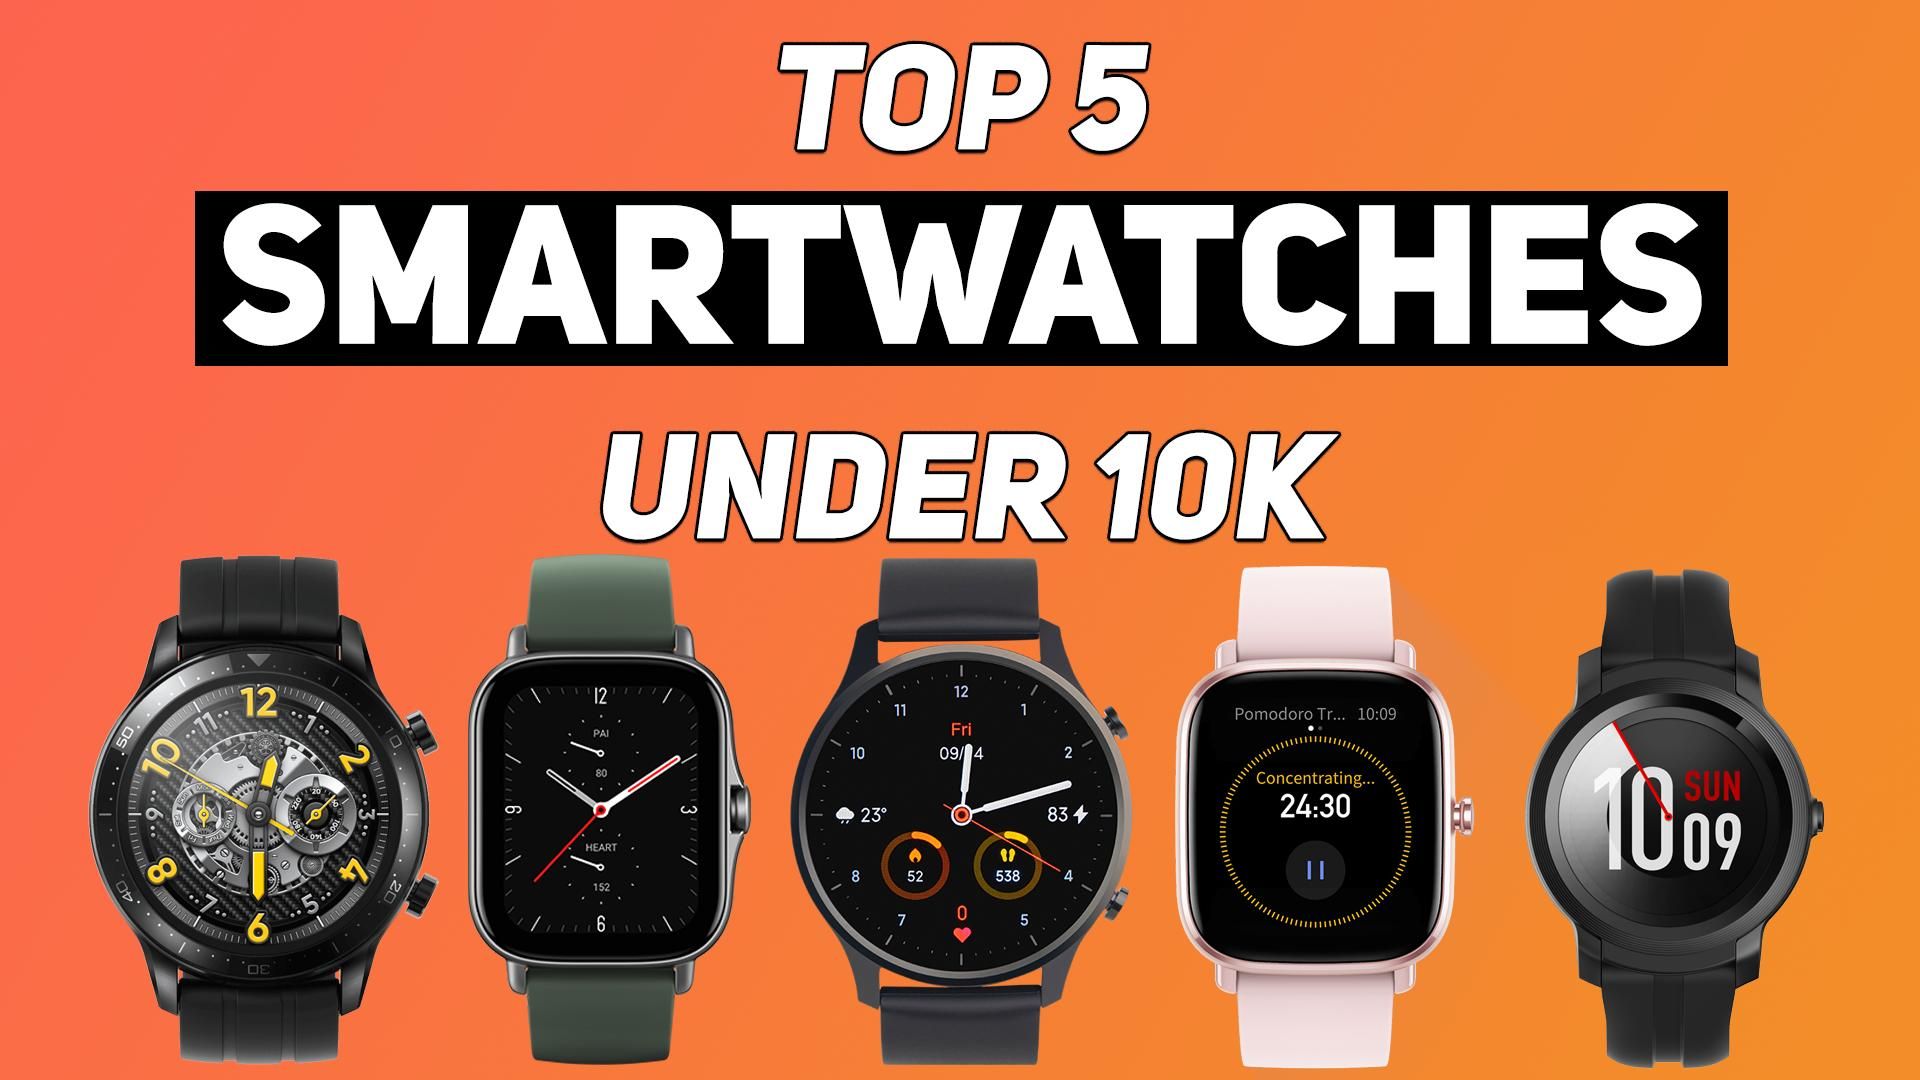 MI Watch Revolve Active To Amazfit GTS 2 Mini; Top 5 Smartwatches Under 10k That You Might Not Known About